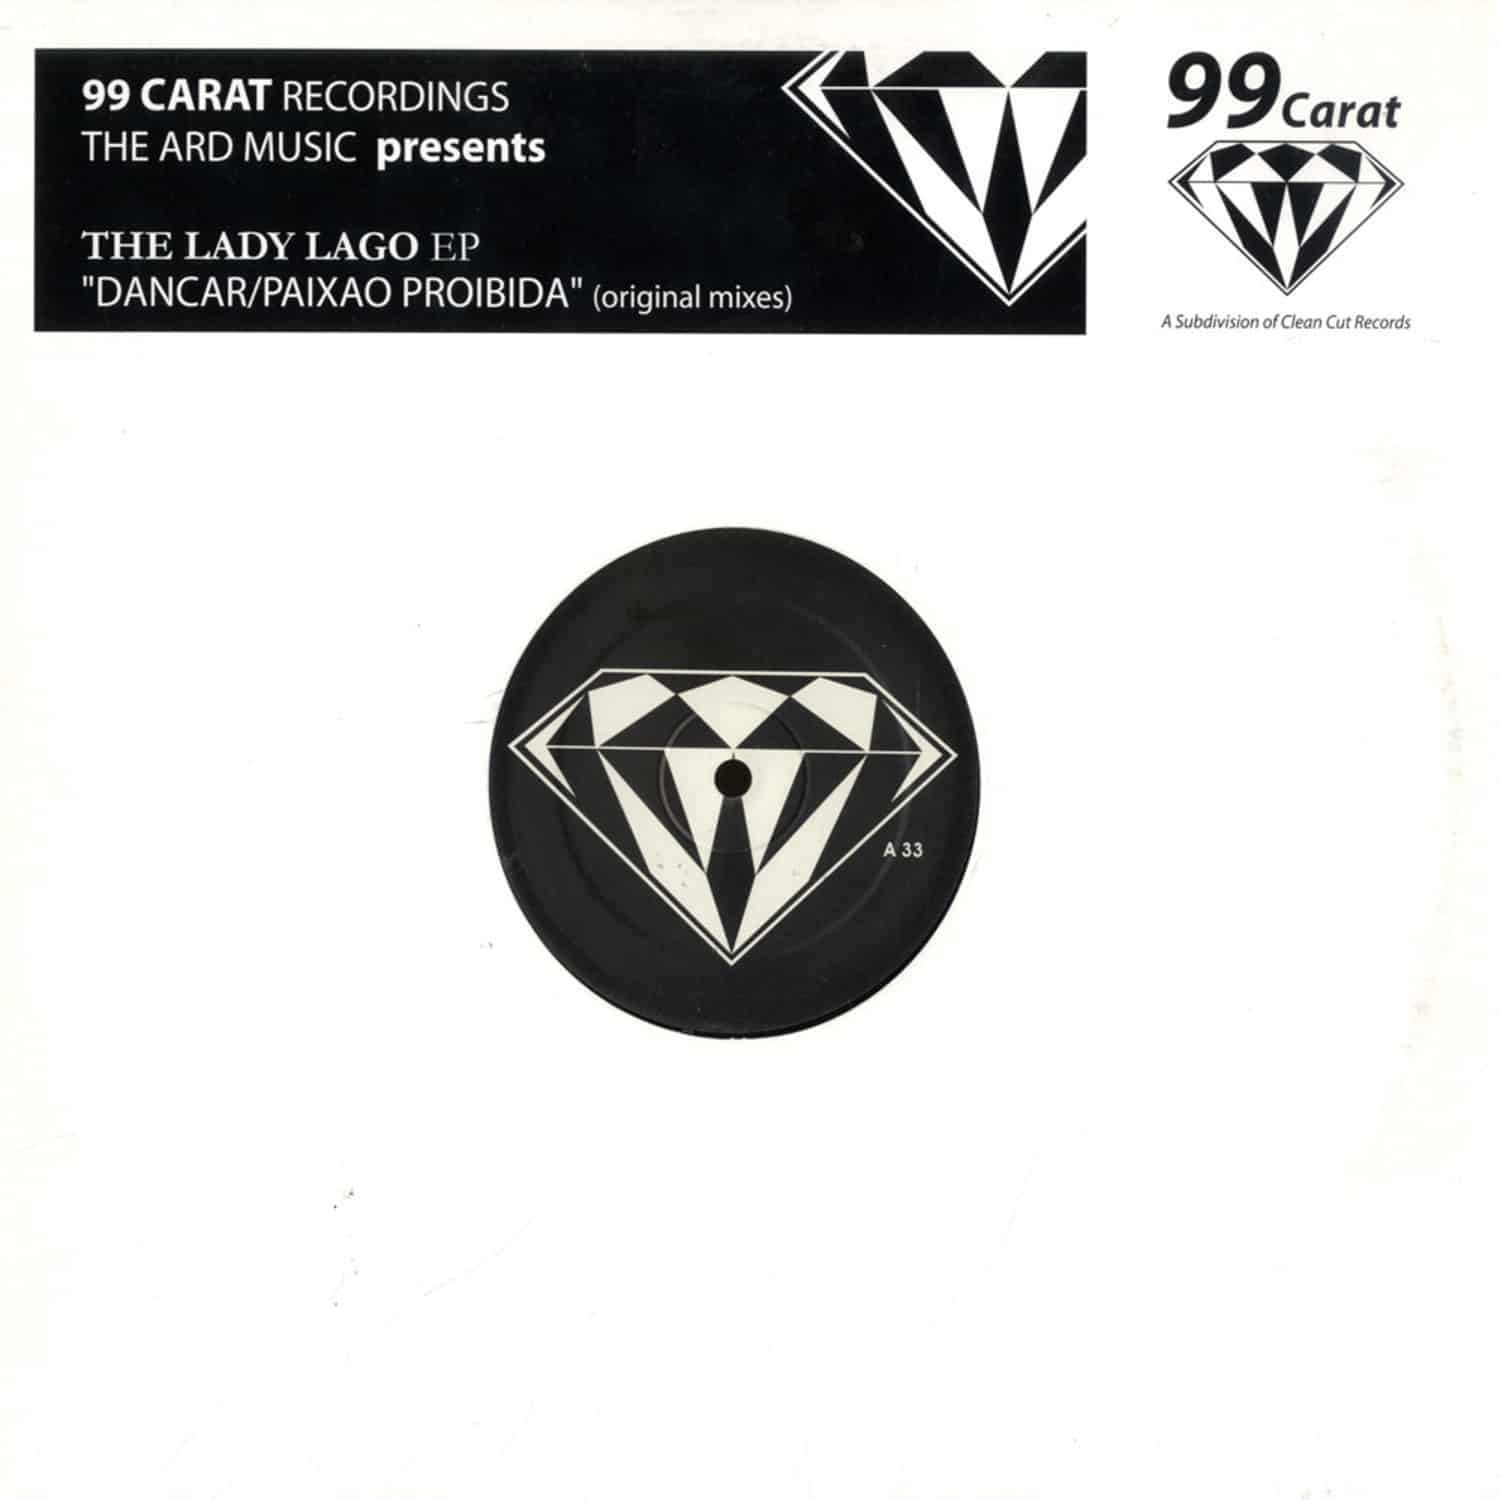 The ARD Music - THE LADY LAGO EP